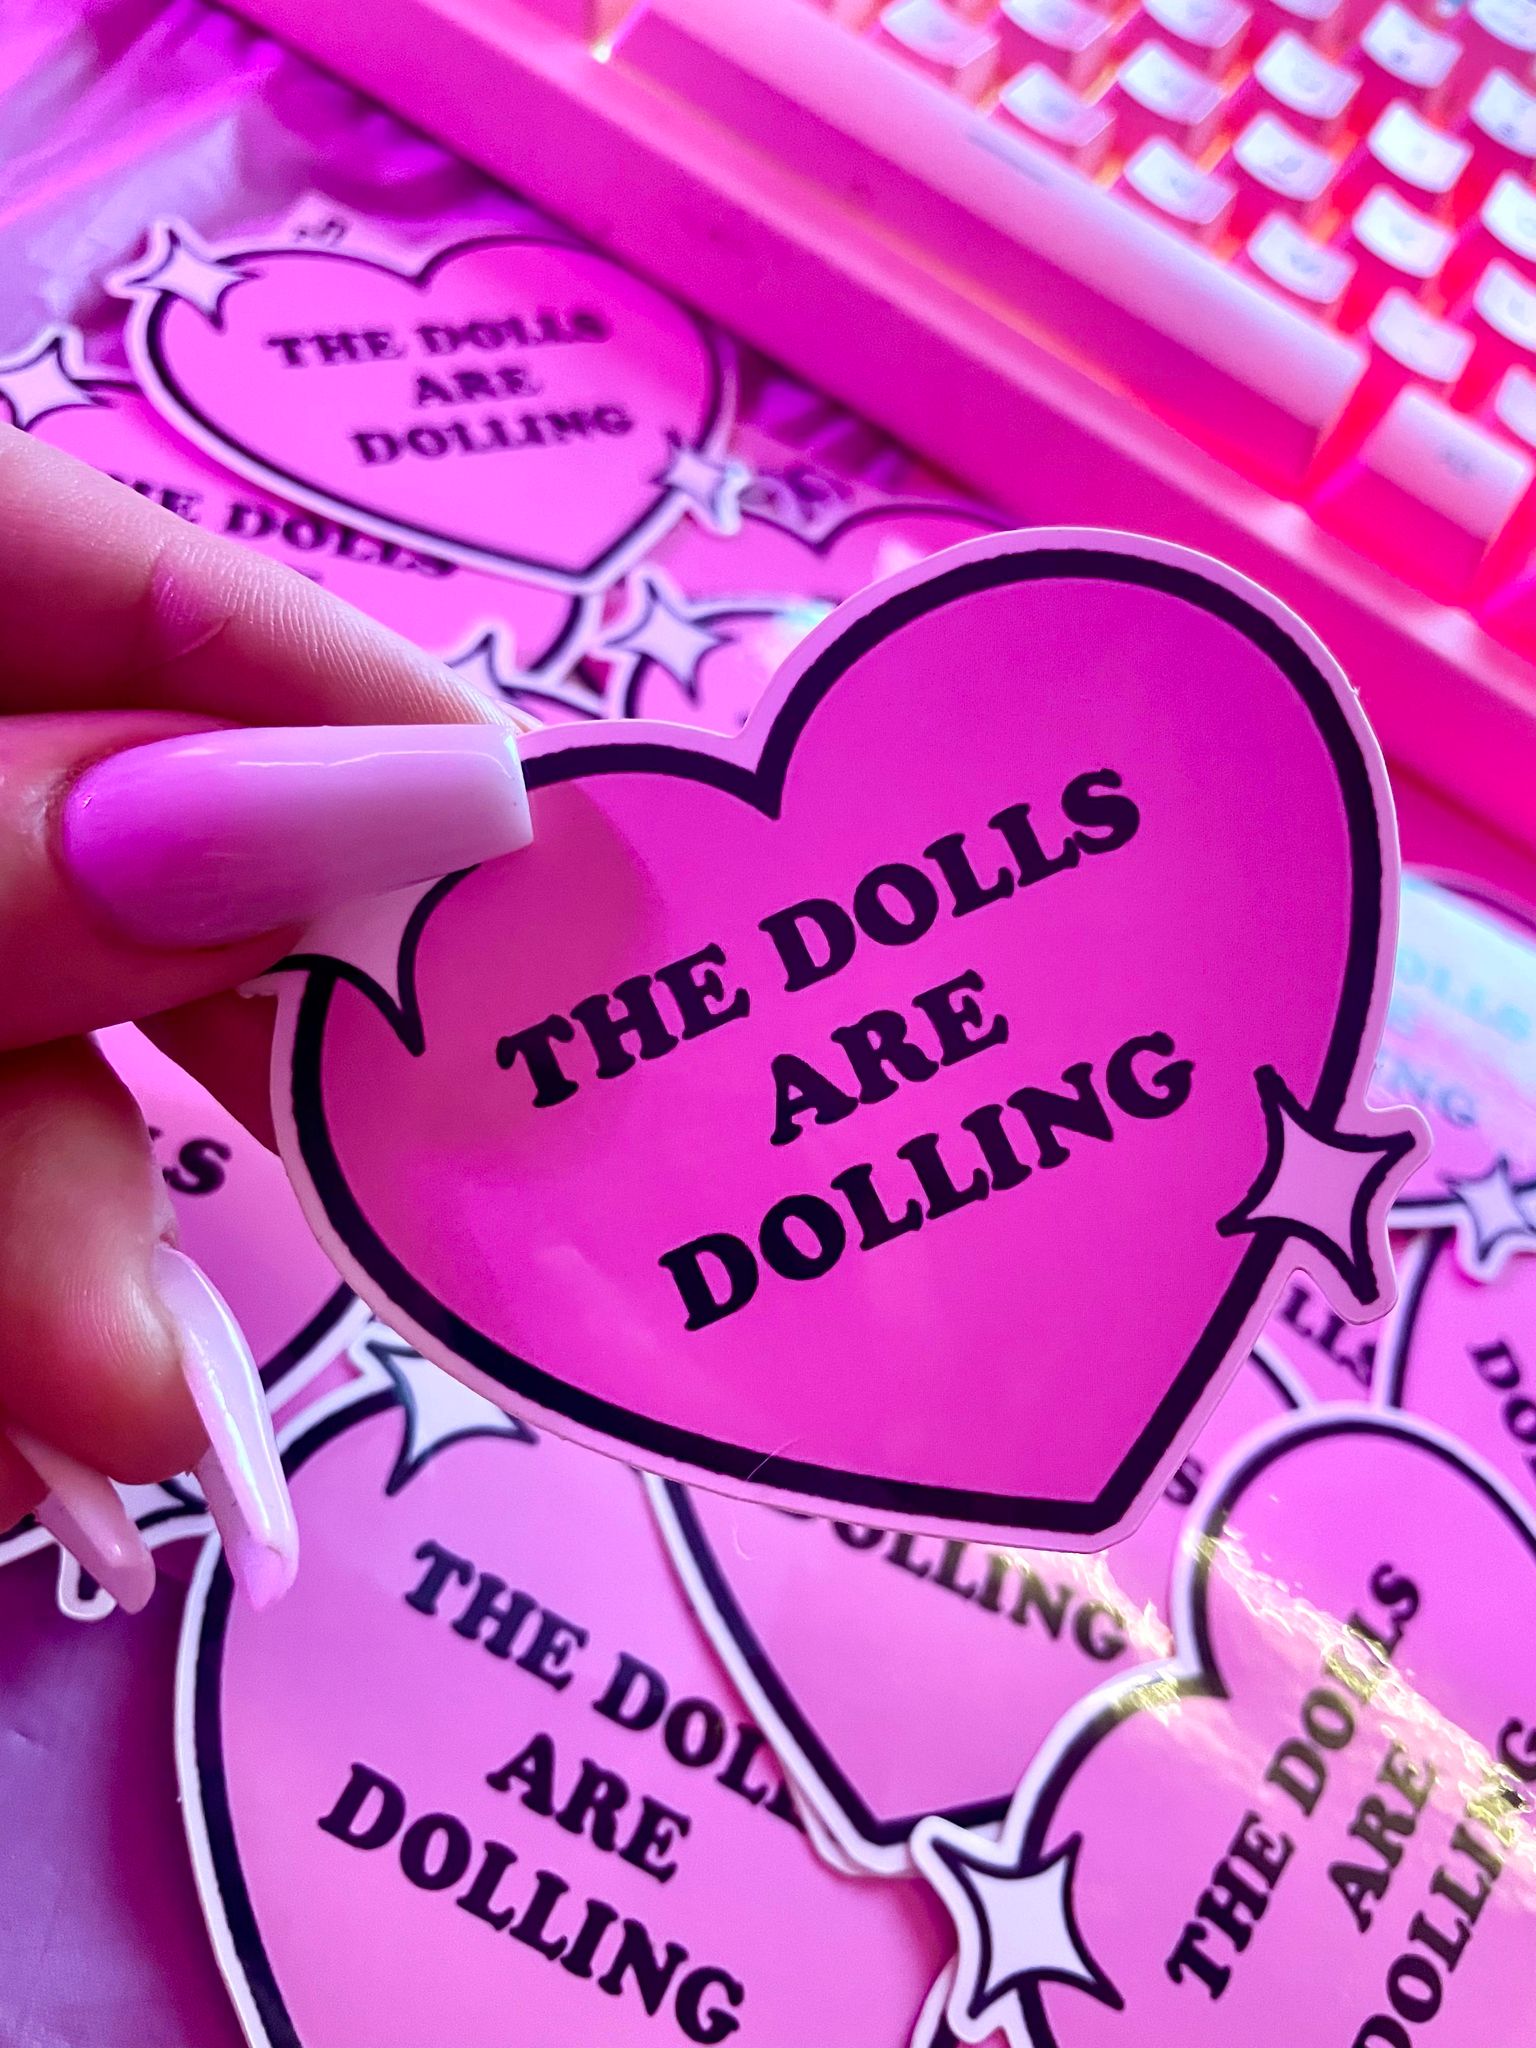 THE DOLLS ARE DOLLING STICKER